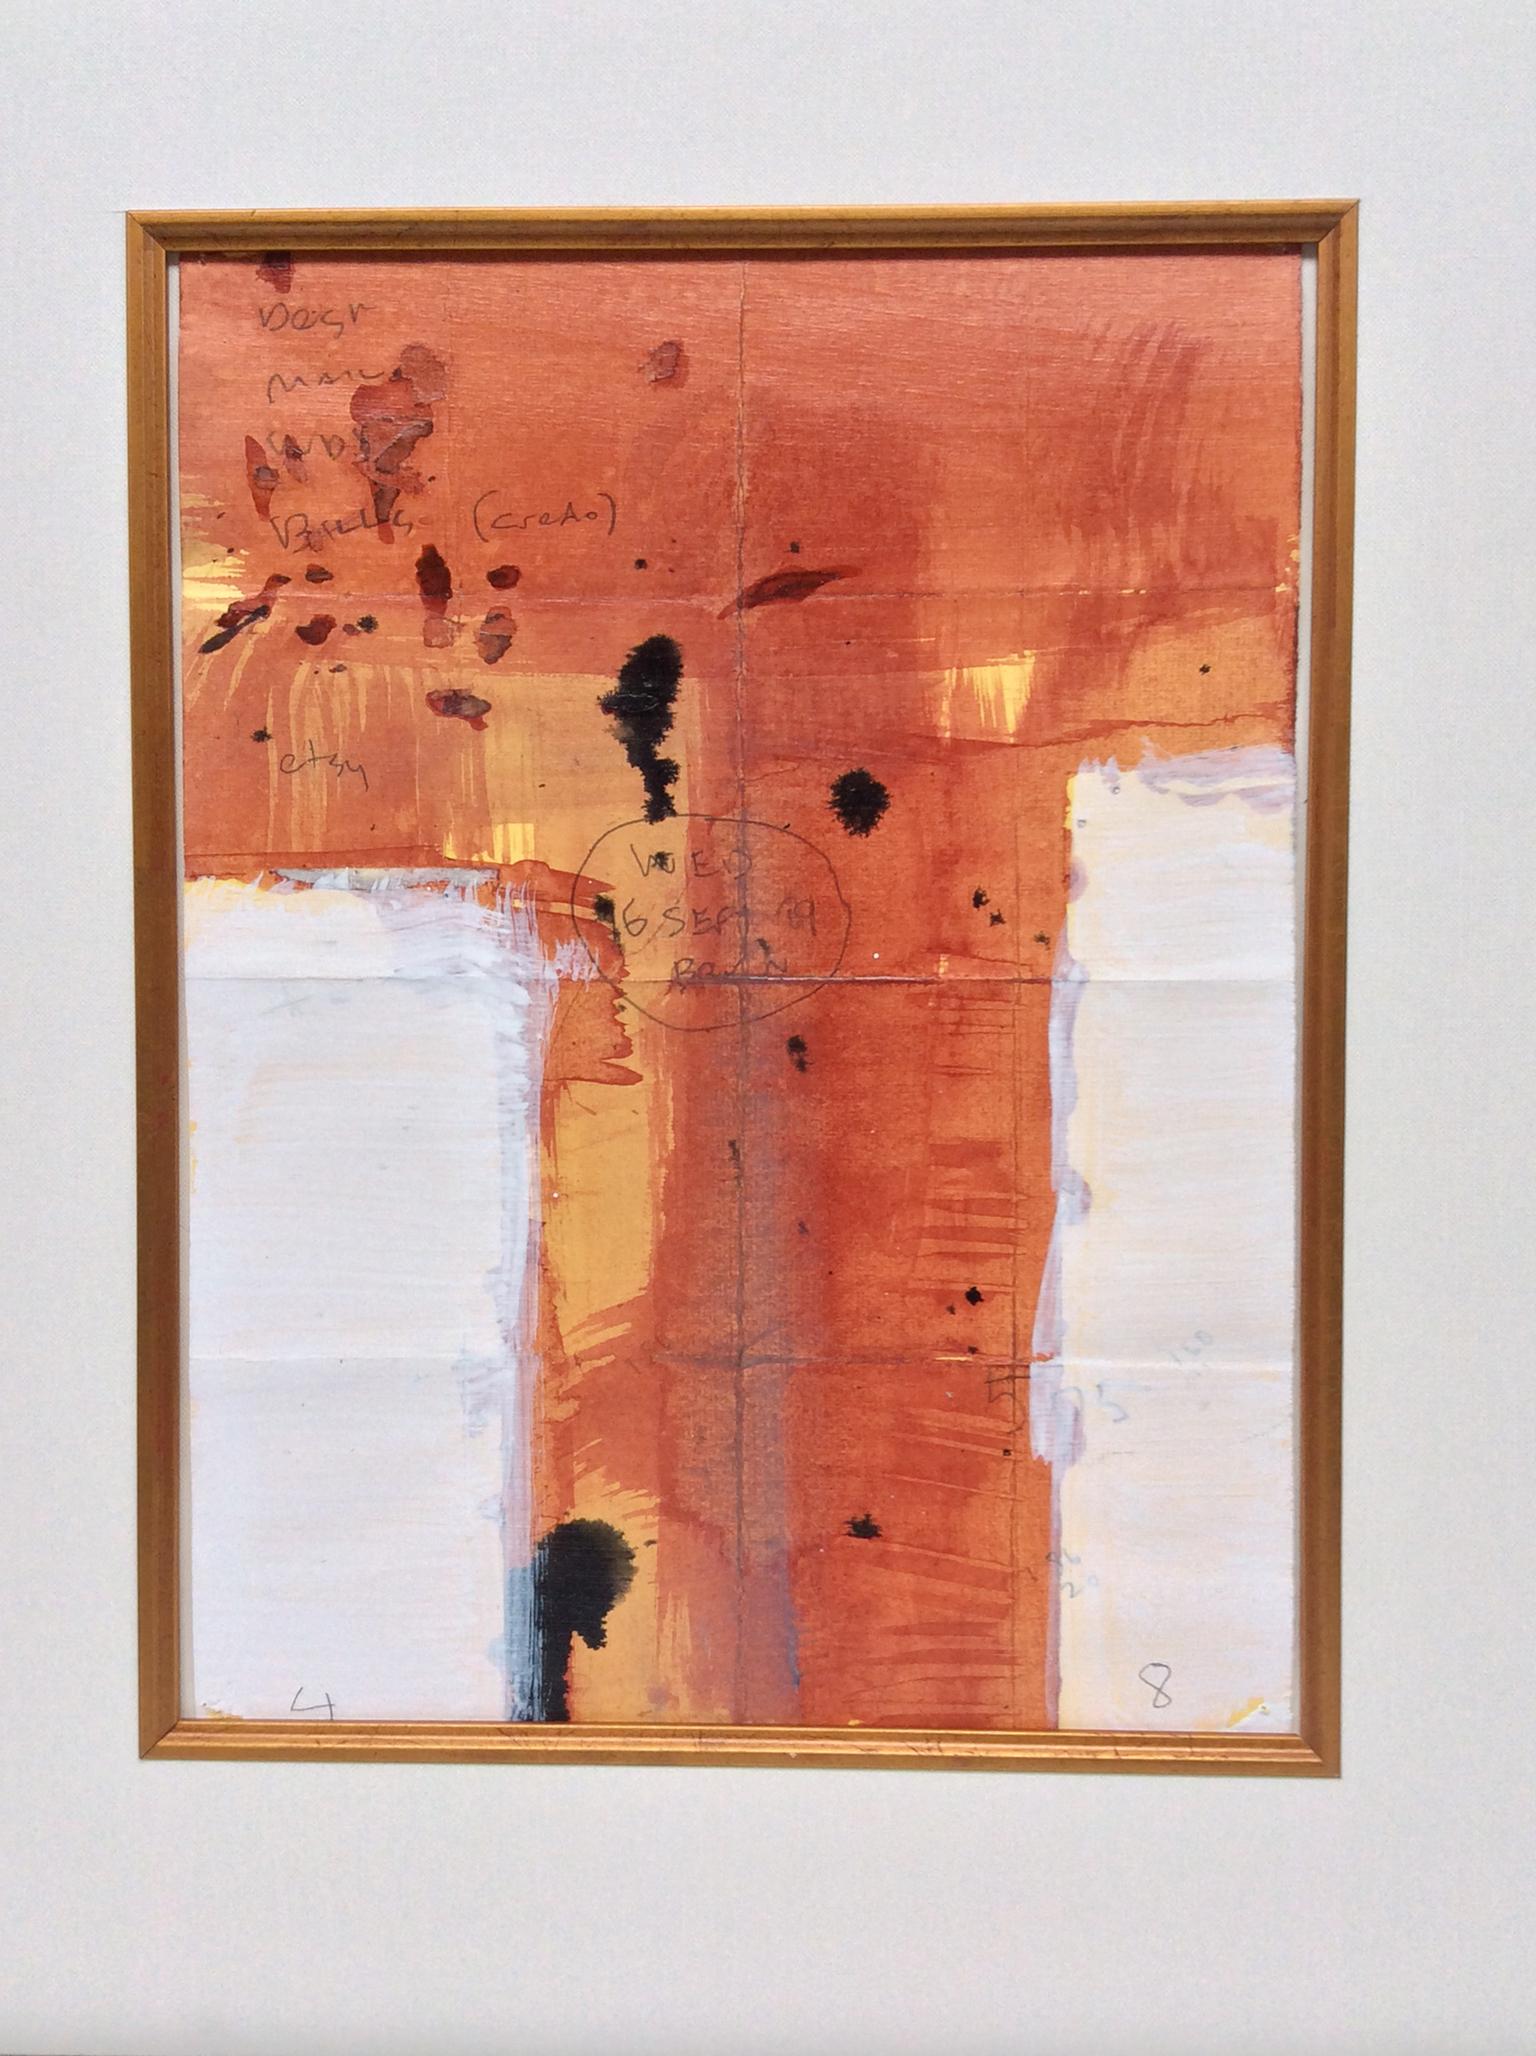 A richly-hued abstract work on paper by the artist M.P. Landis. The abstract paintings and works on paper are the type that take form through the artist's layering of materials. Acrylic and pencil on paper. From the artist's series mixed-media works